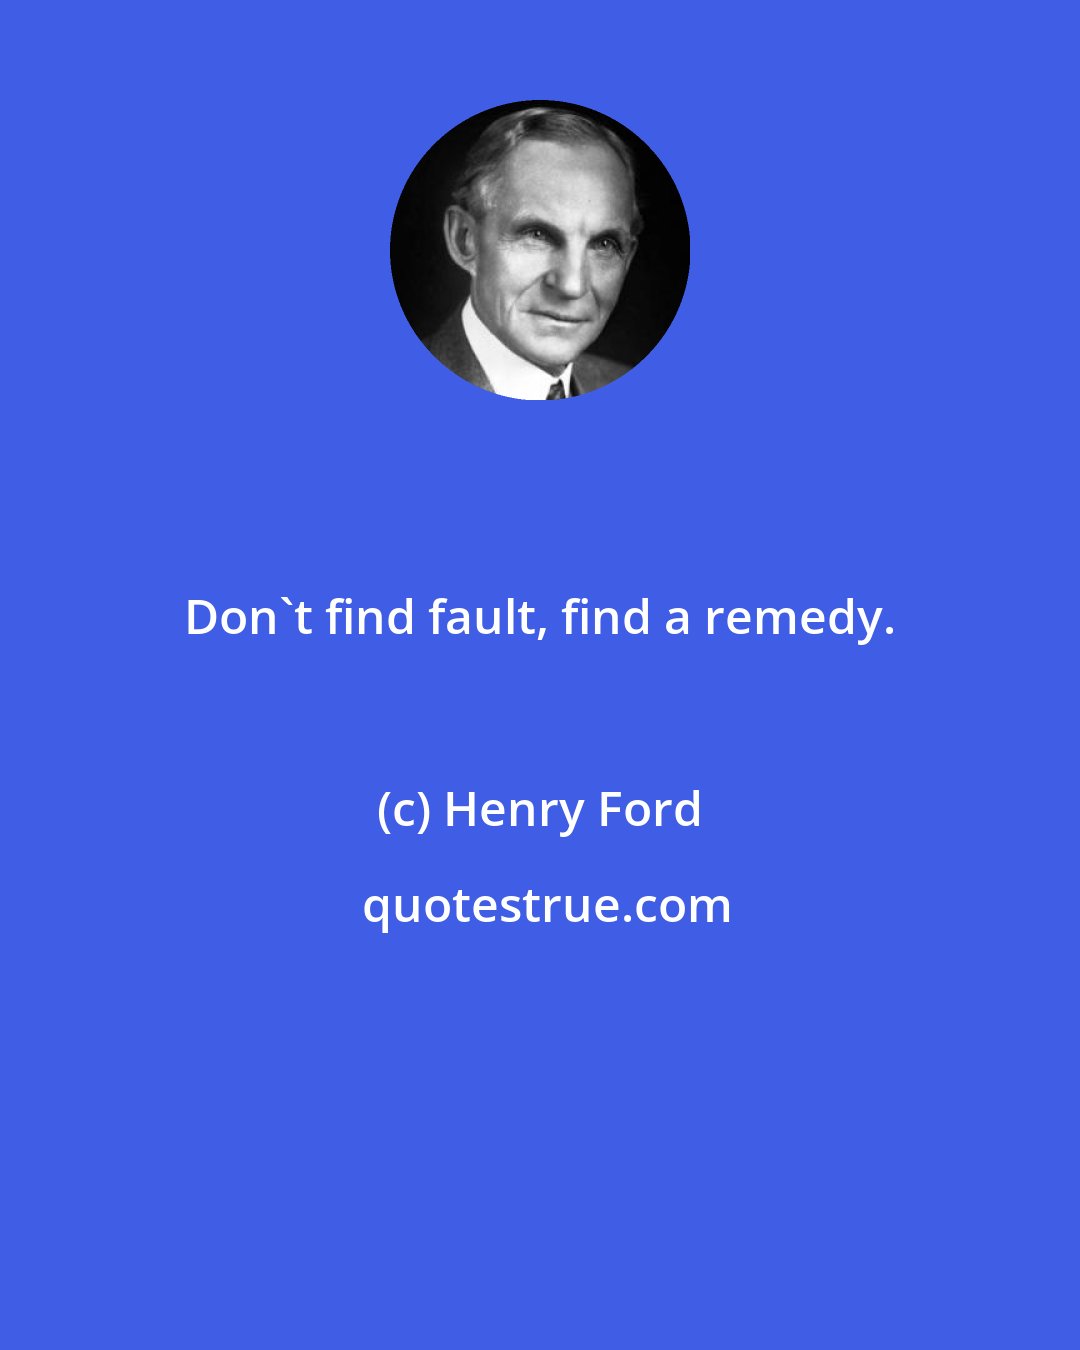 Henry Ford: Don't find fault, find a remedy.